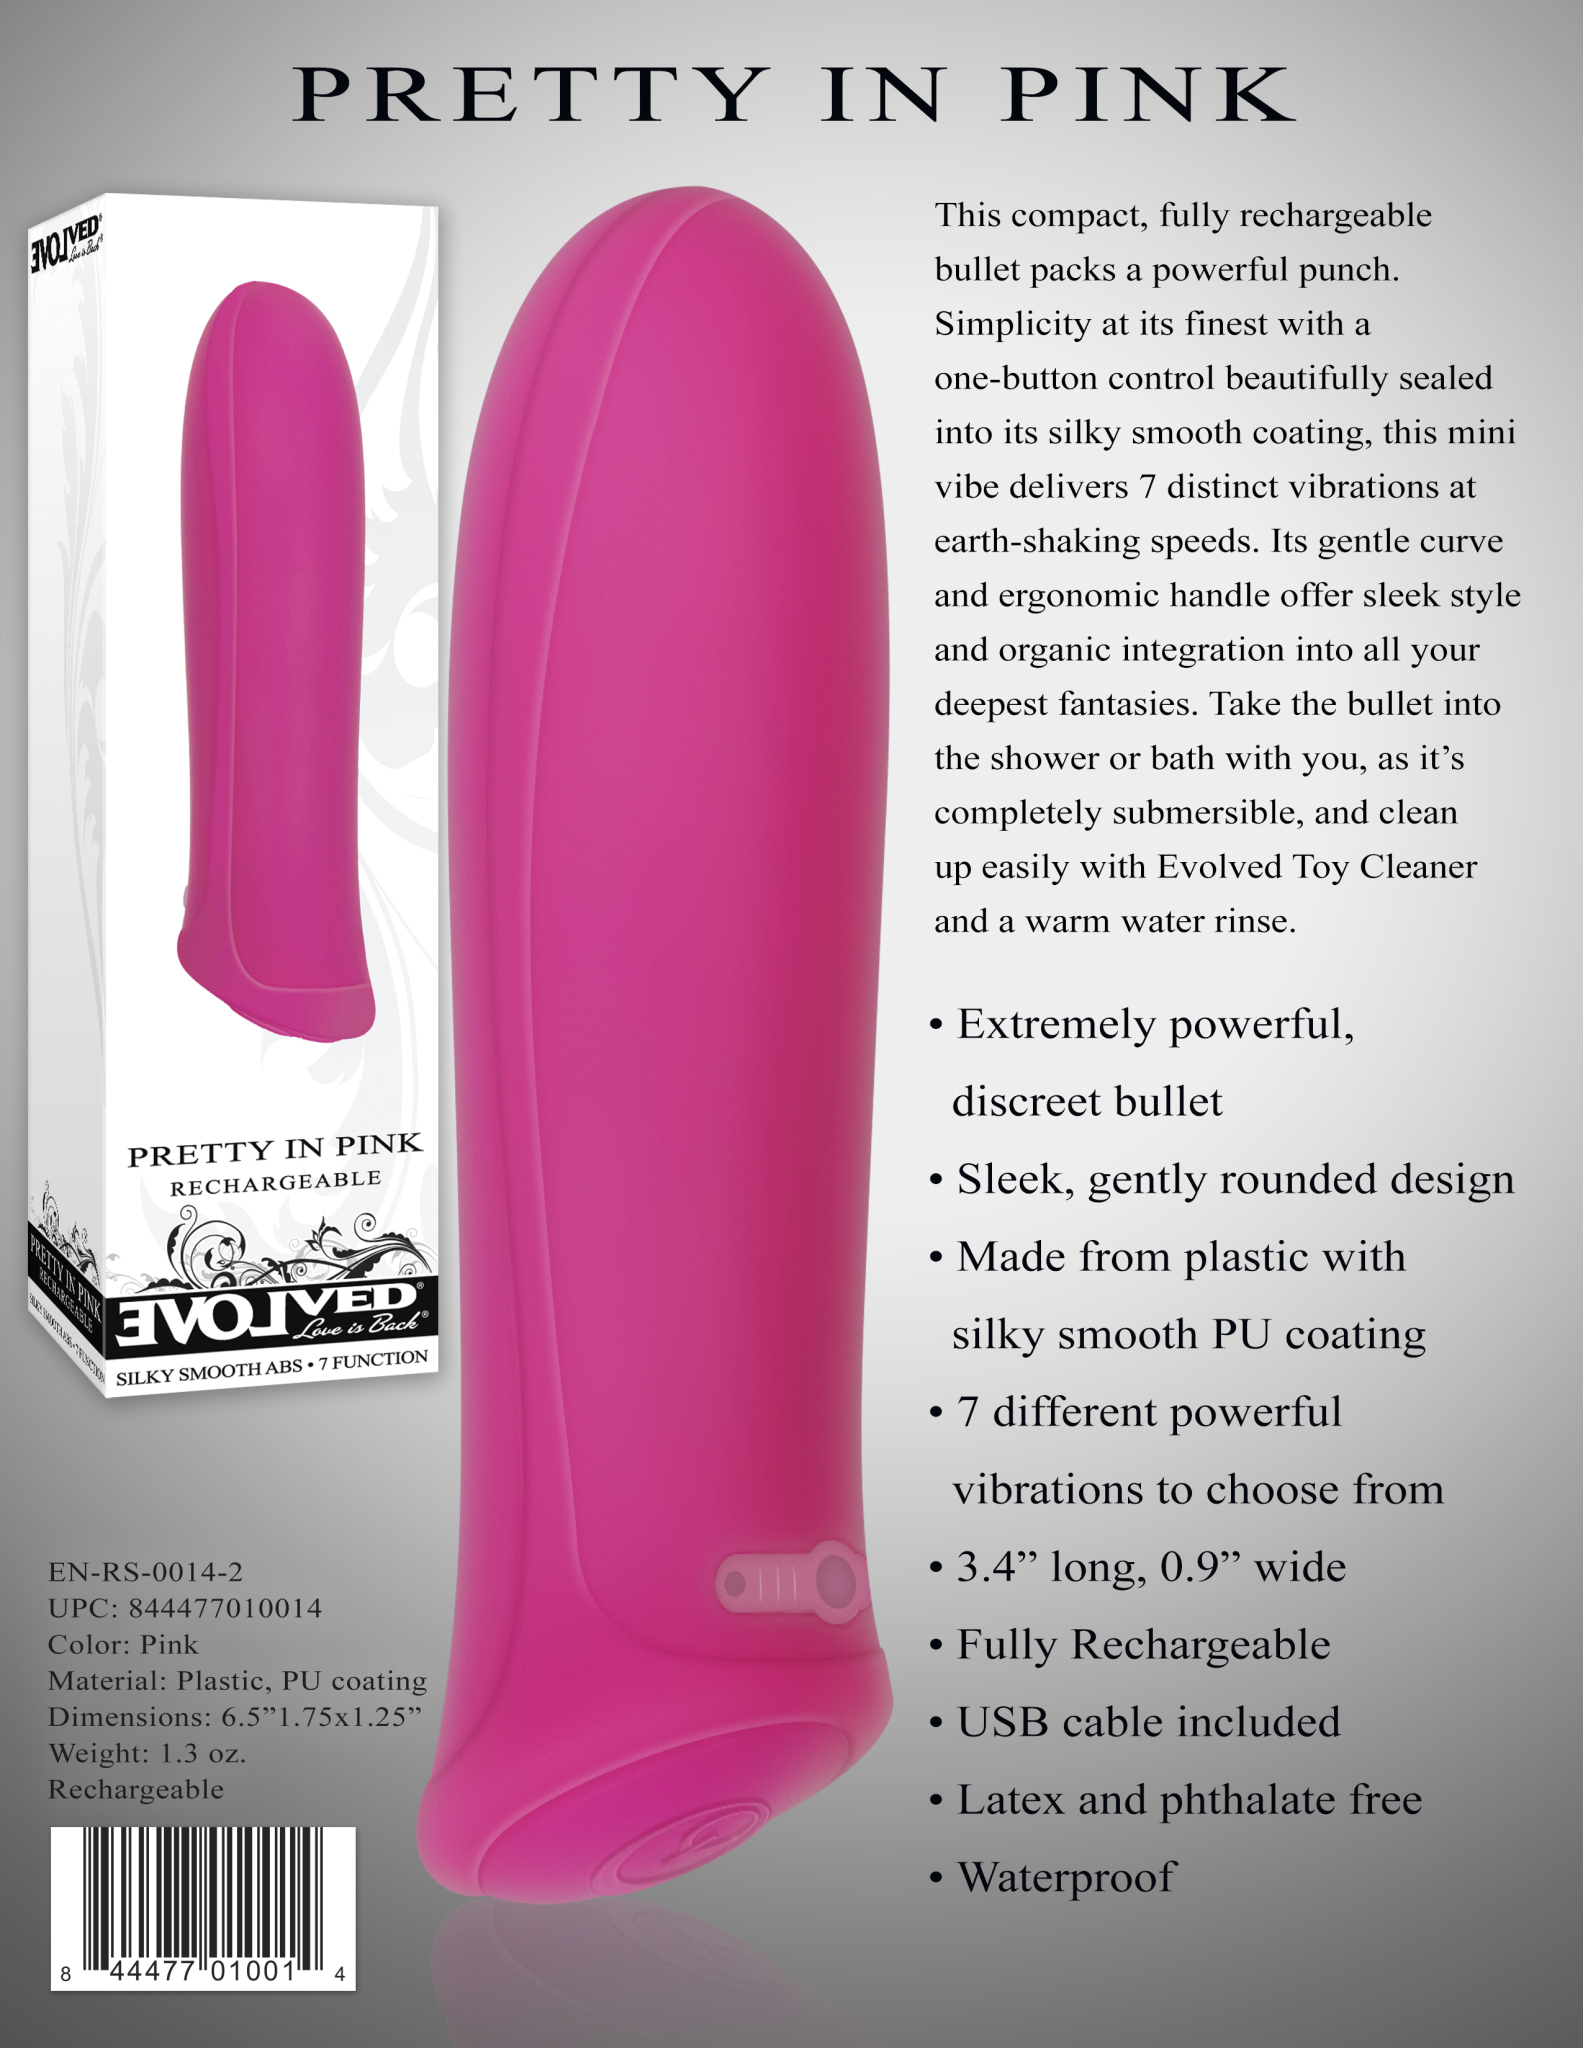 PRETTY-IN-PINK-SILICONE-RECHARGEABLE-back.jpg